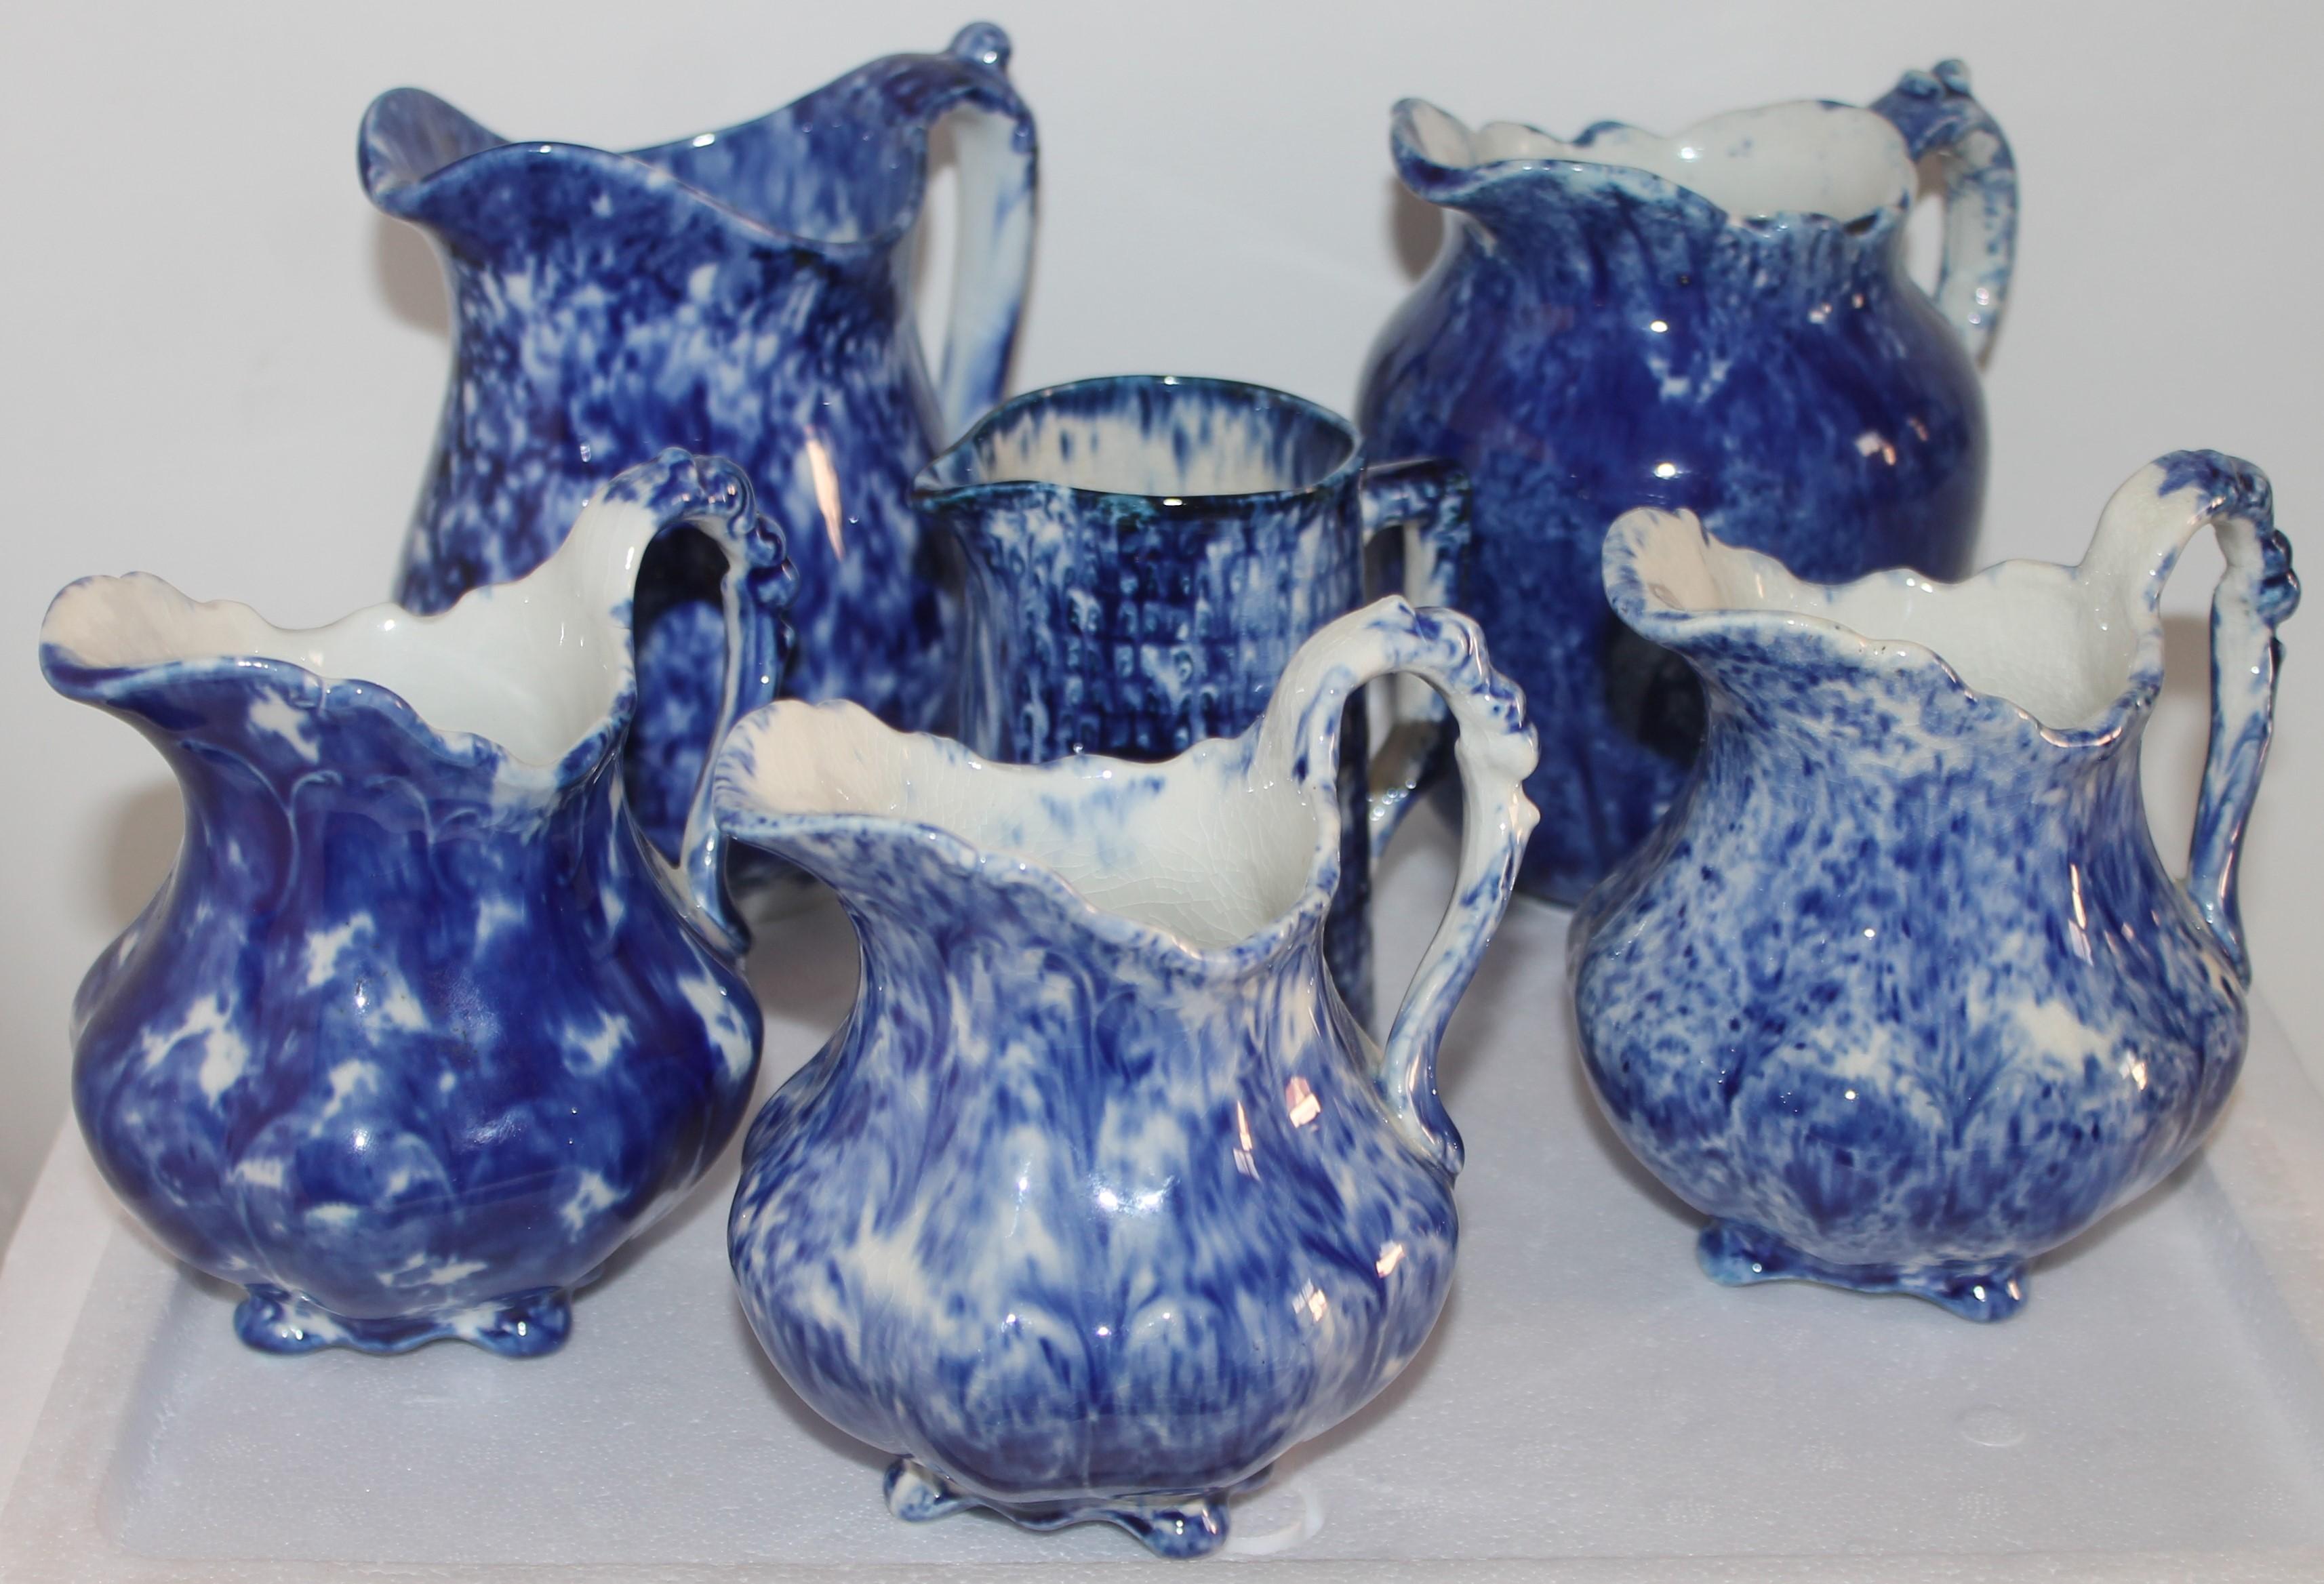 Adirondack Collection of 19thc Sponge Ware Pitchers, 6 Pieces For Sale